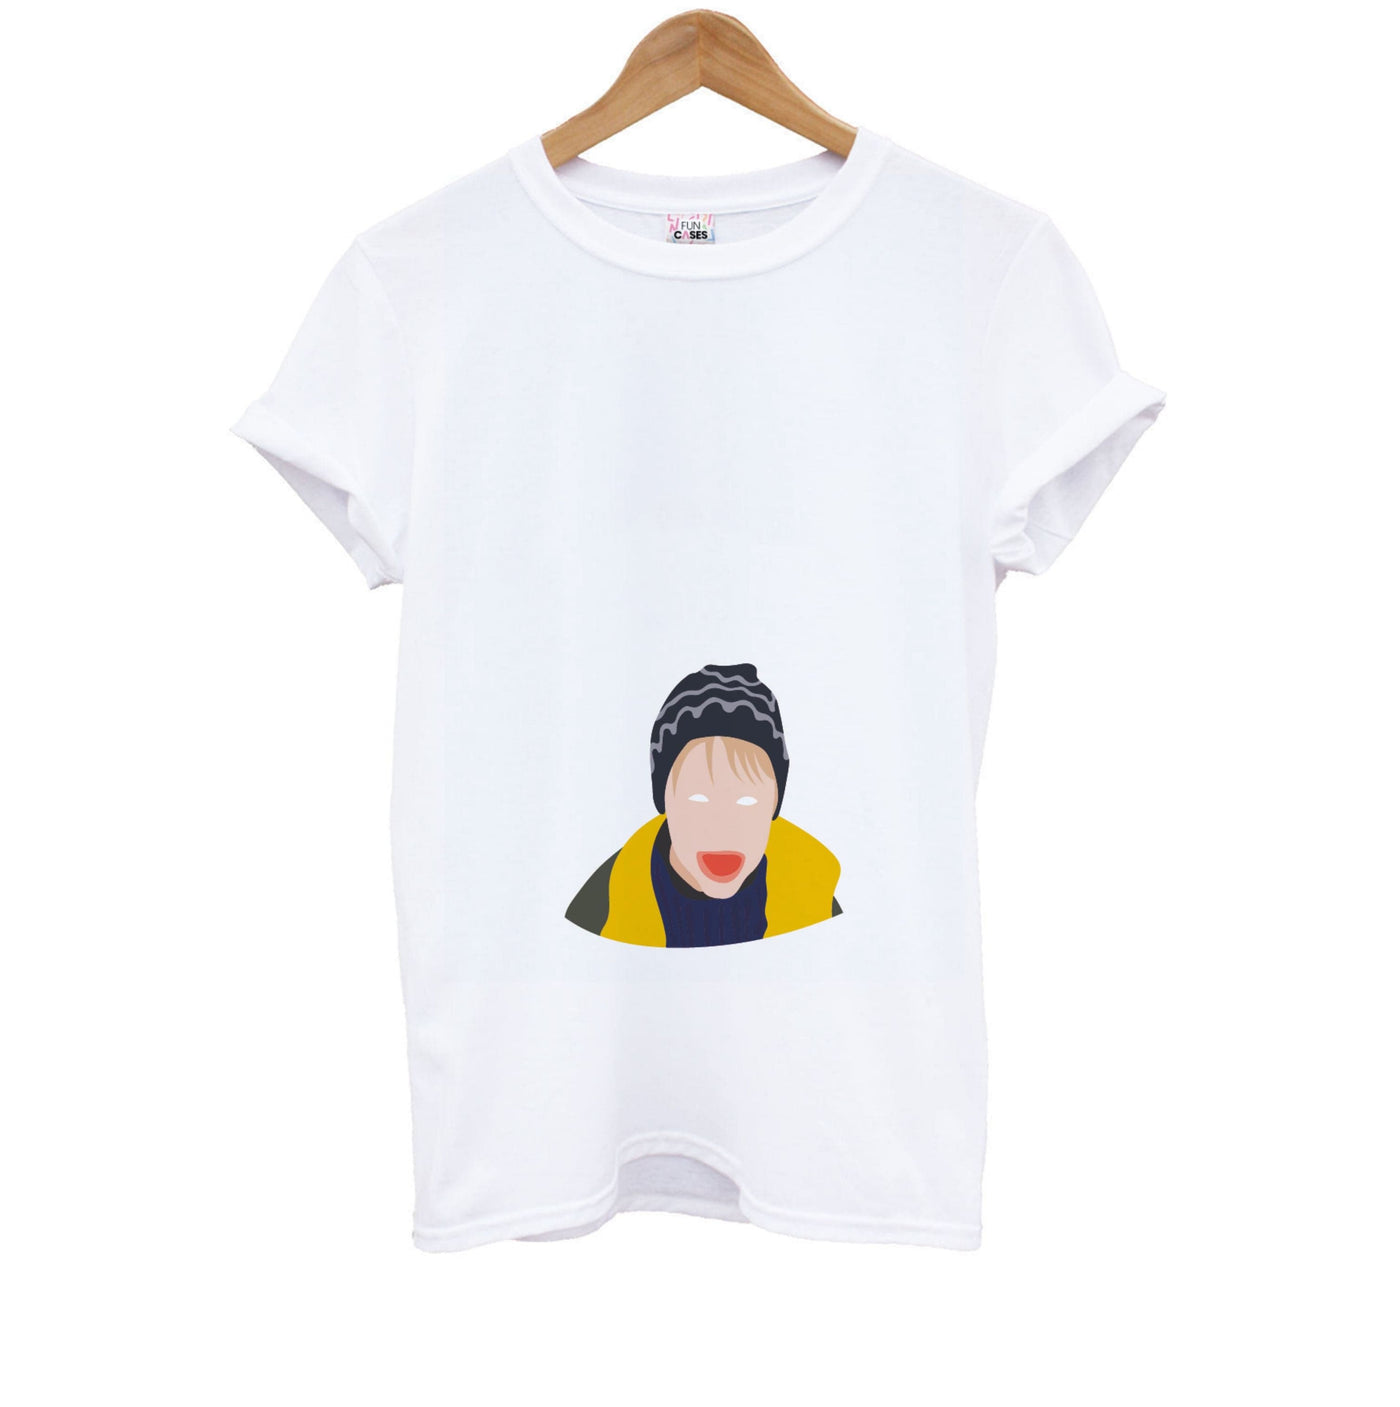 Tongue Out - Home Alone Kids T-Shirt